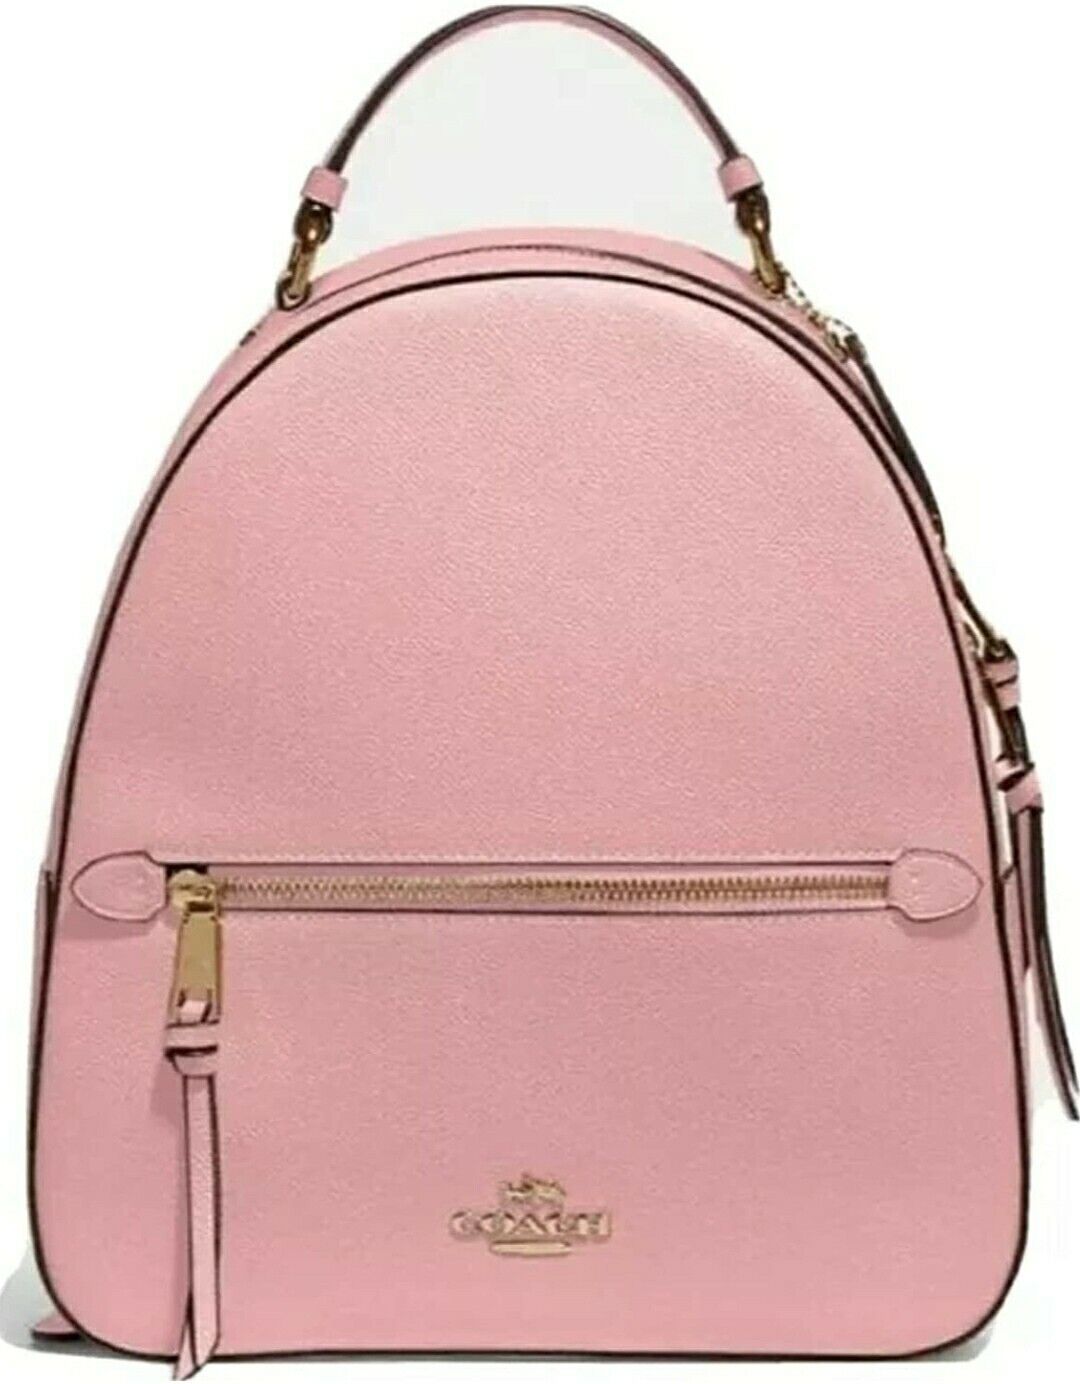 Coach Court Backpack with Tags - Pink